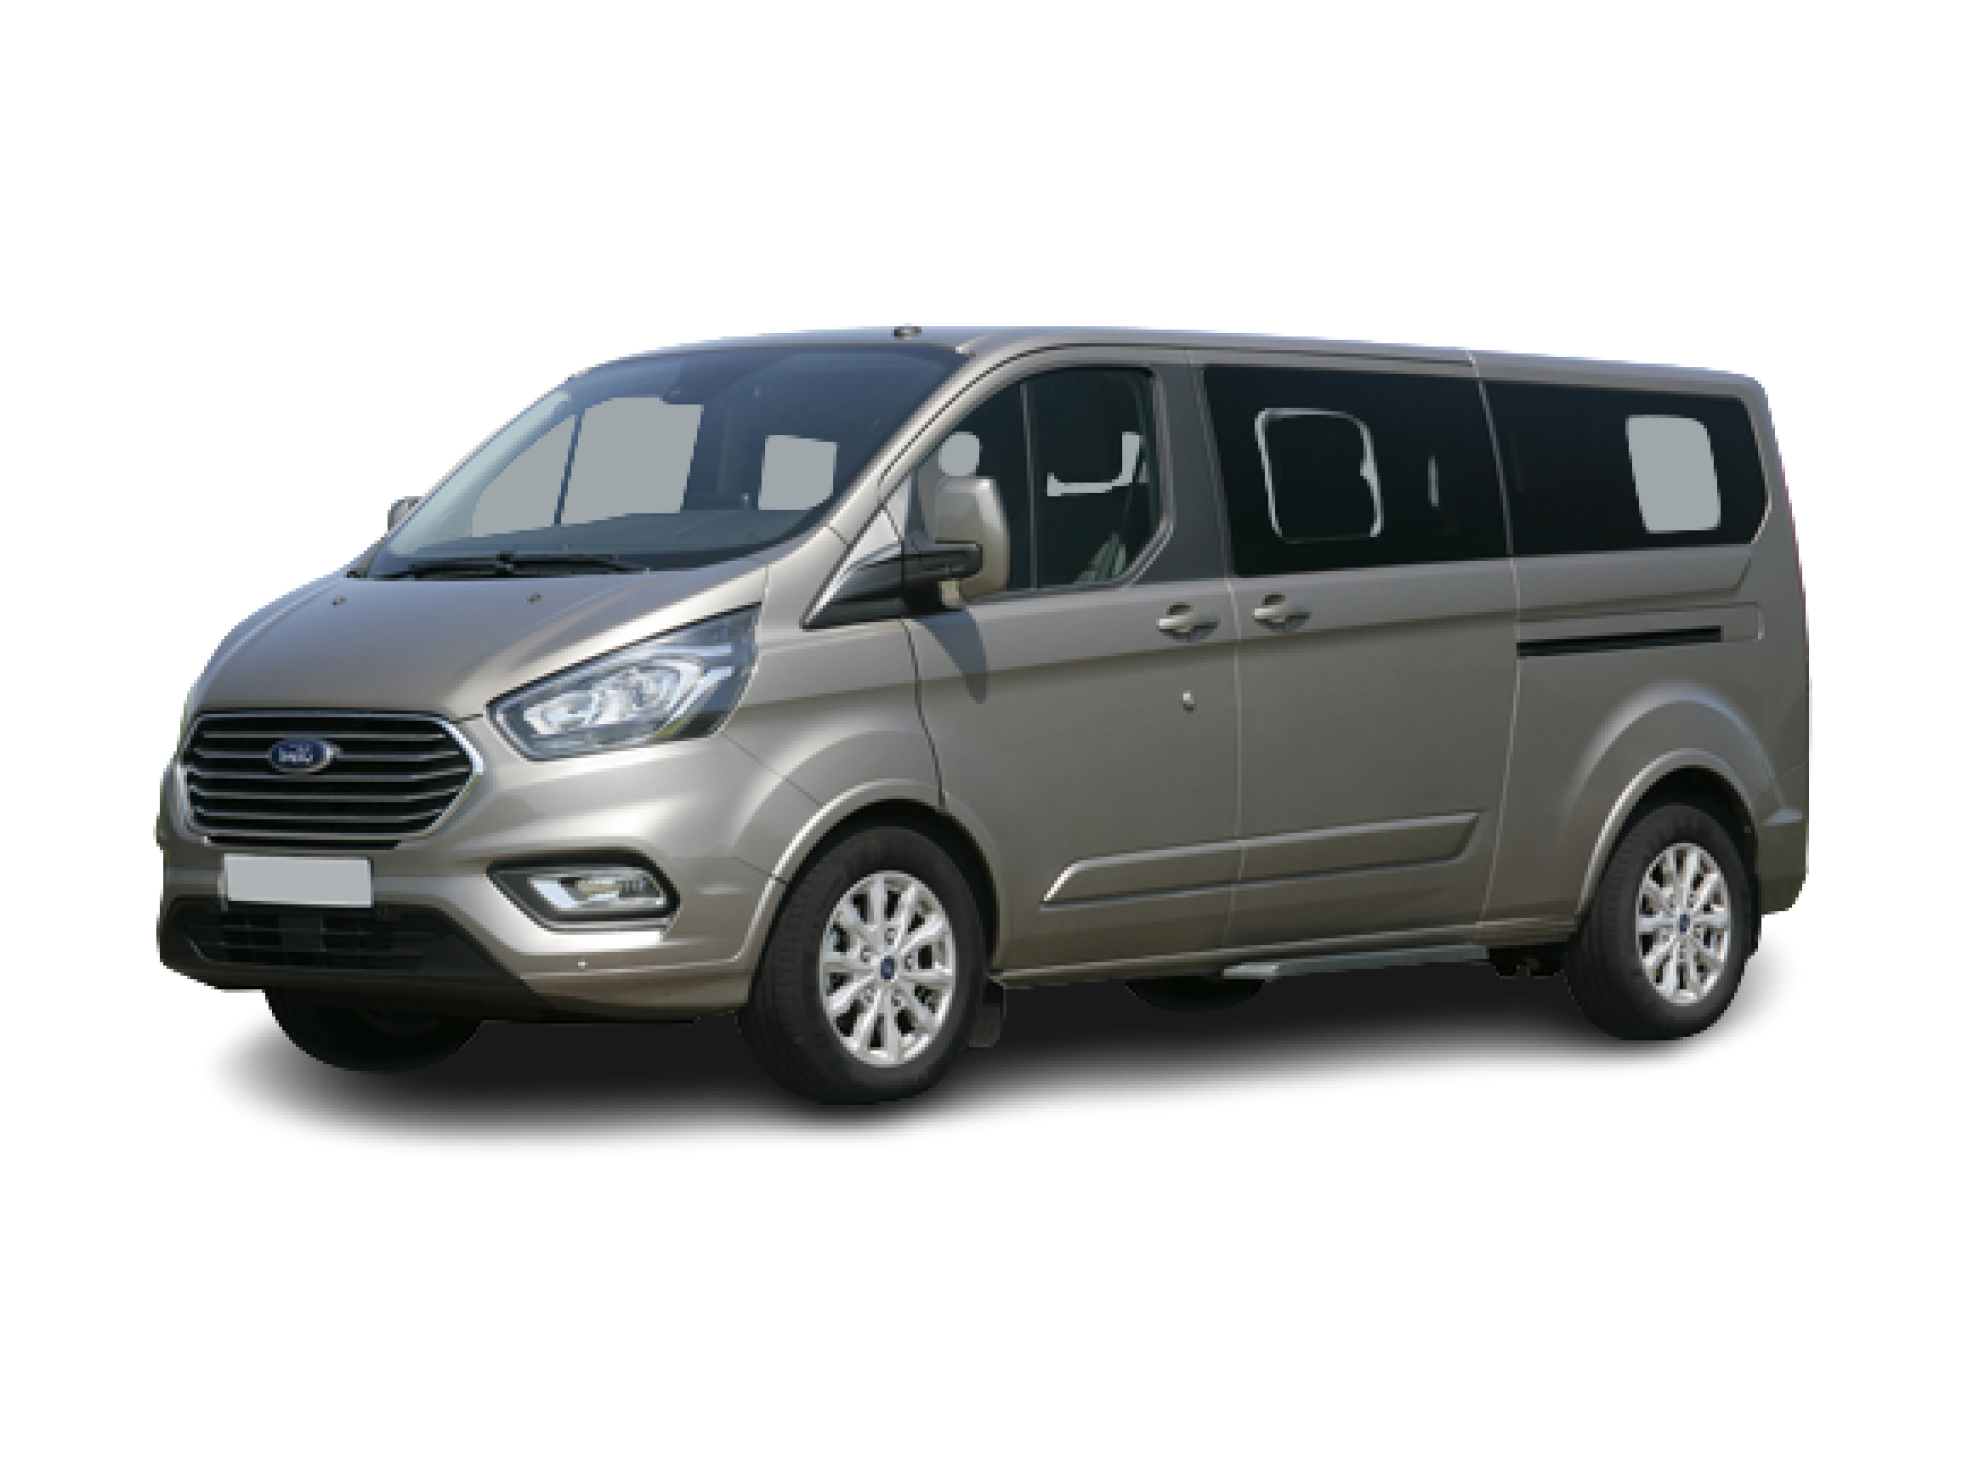 FORD TOURNEO OR SIMILAR: